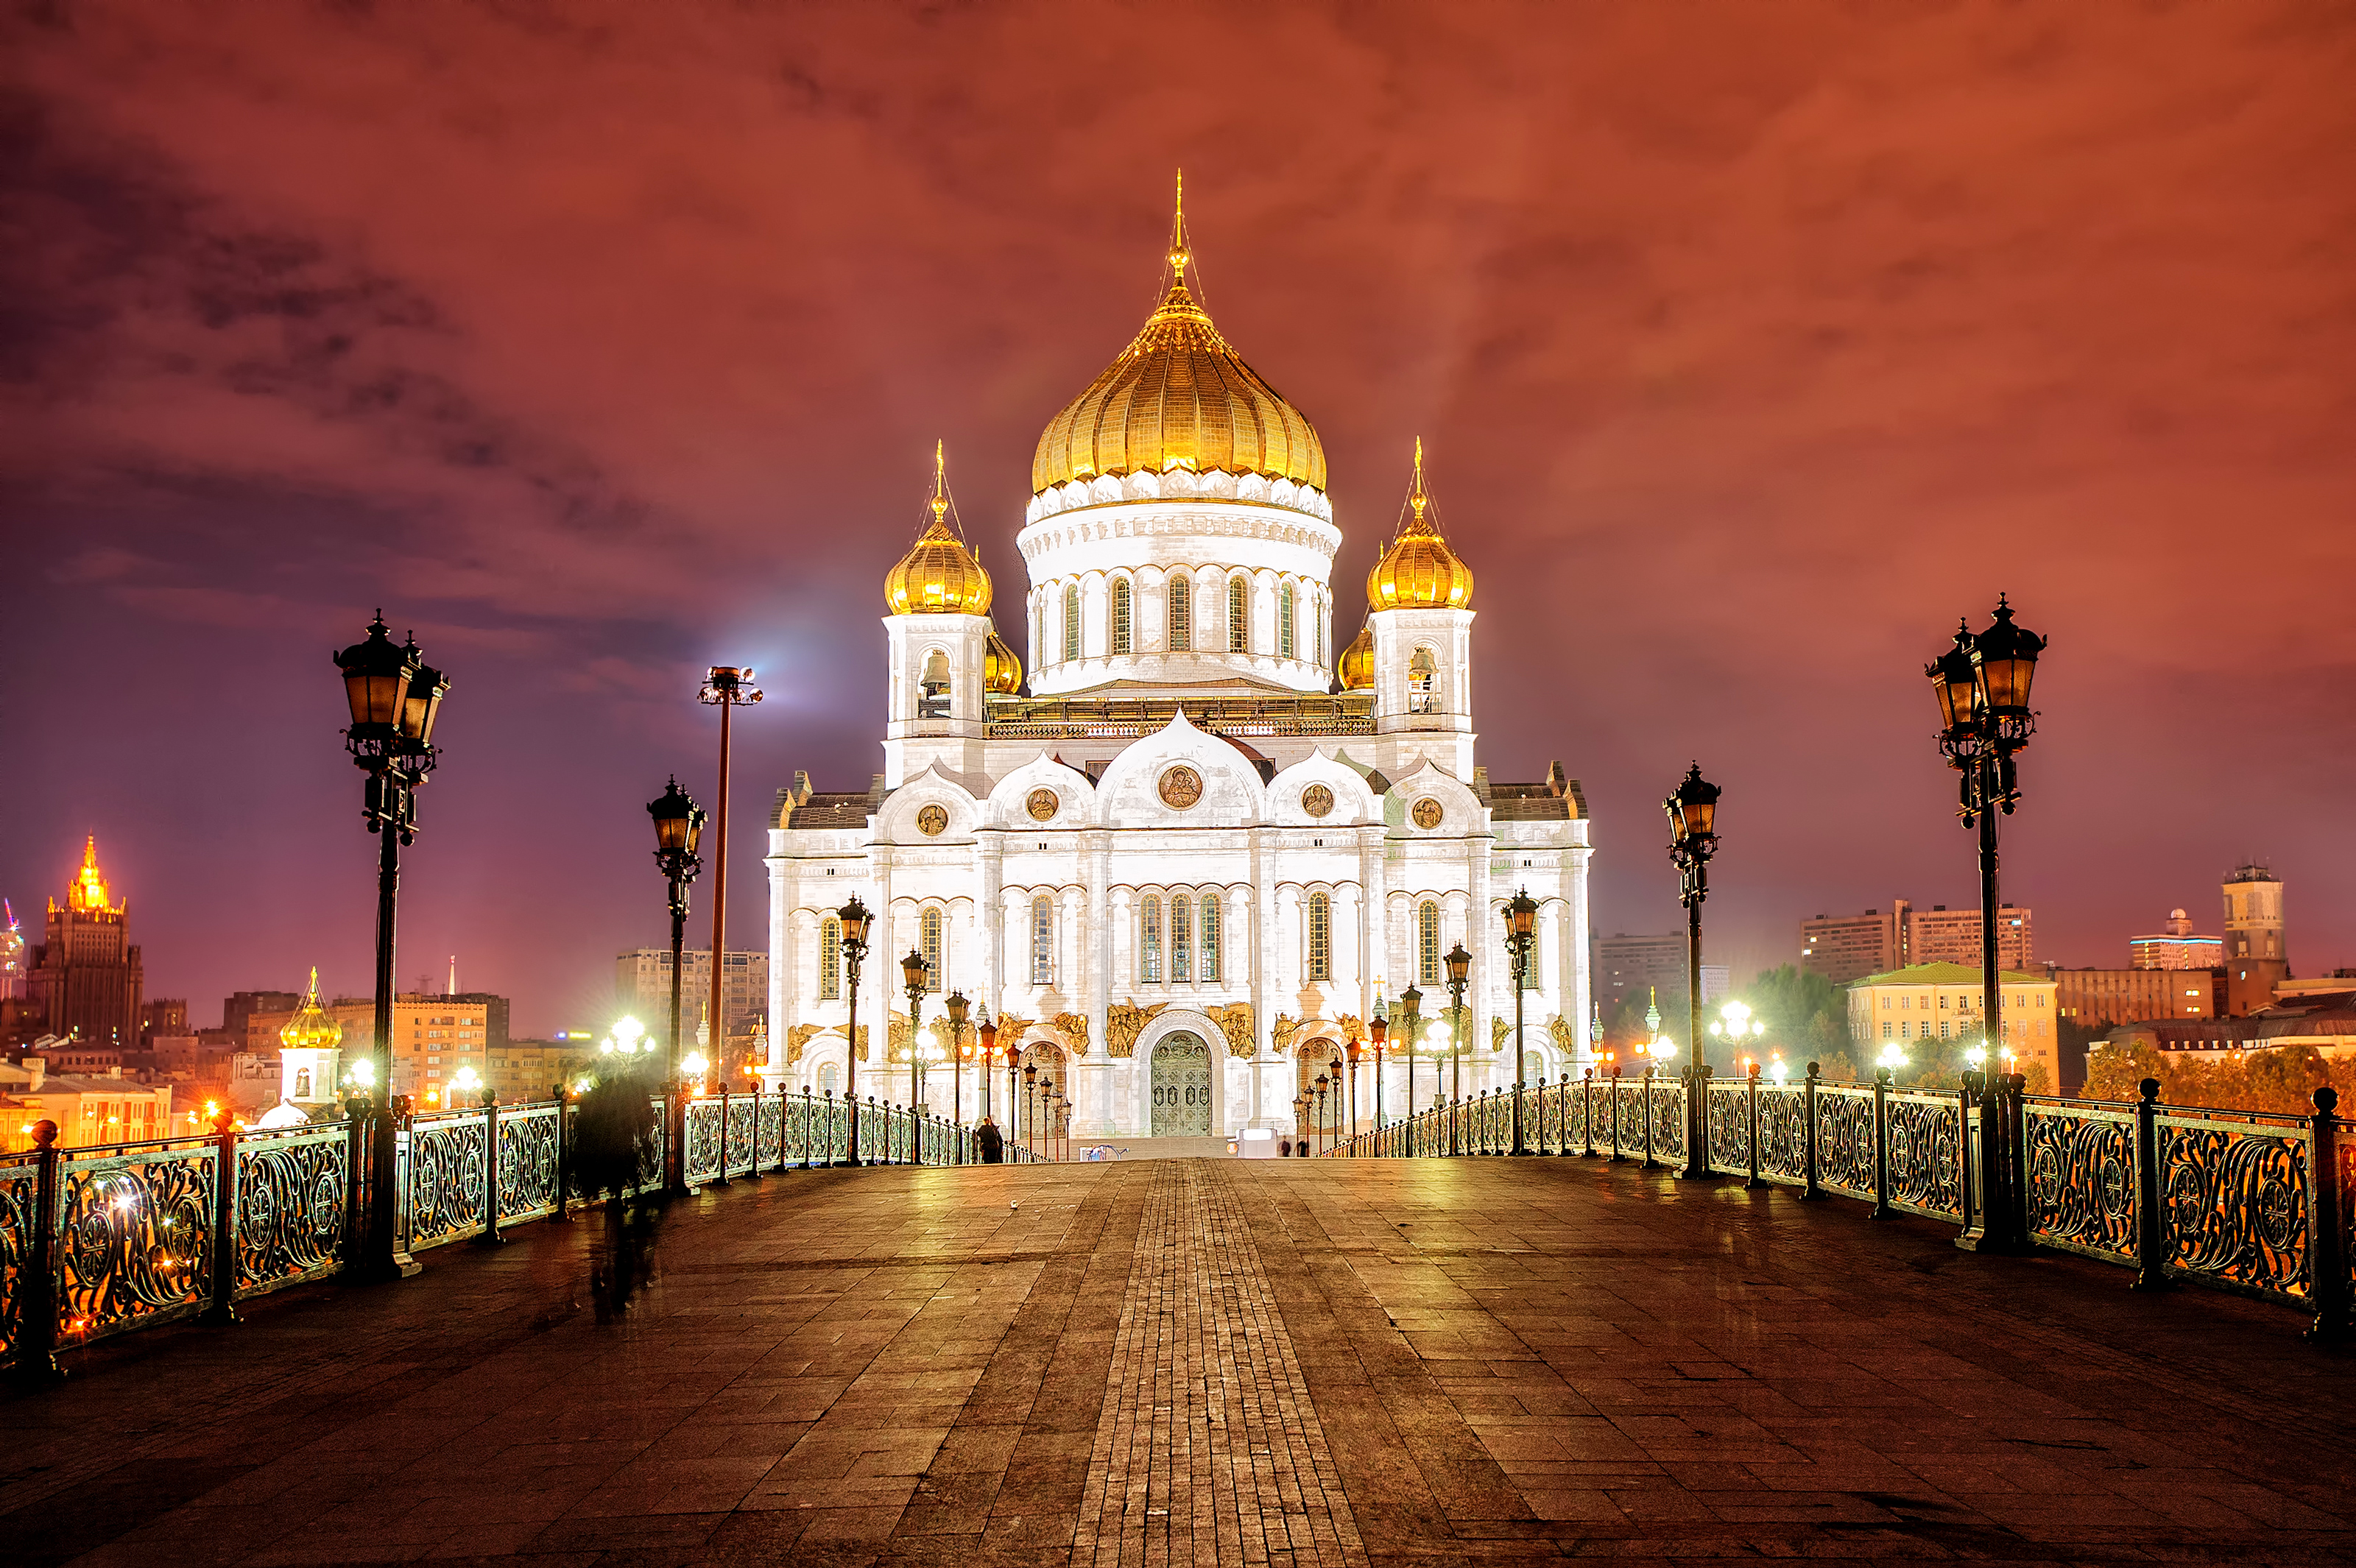 russia, moscow, religious, cathedral of christ the saviour, architecture, building, cathedral, dome, night, cathedrals